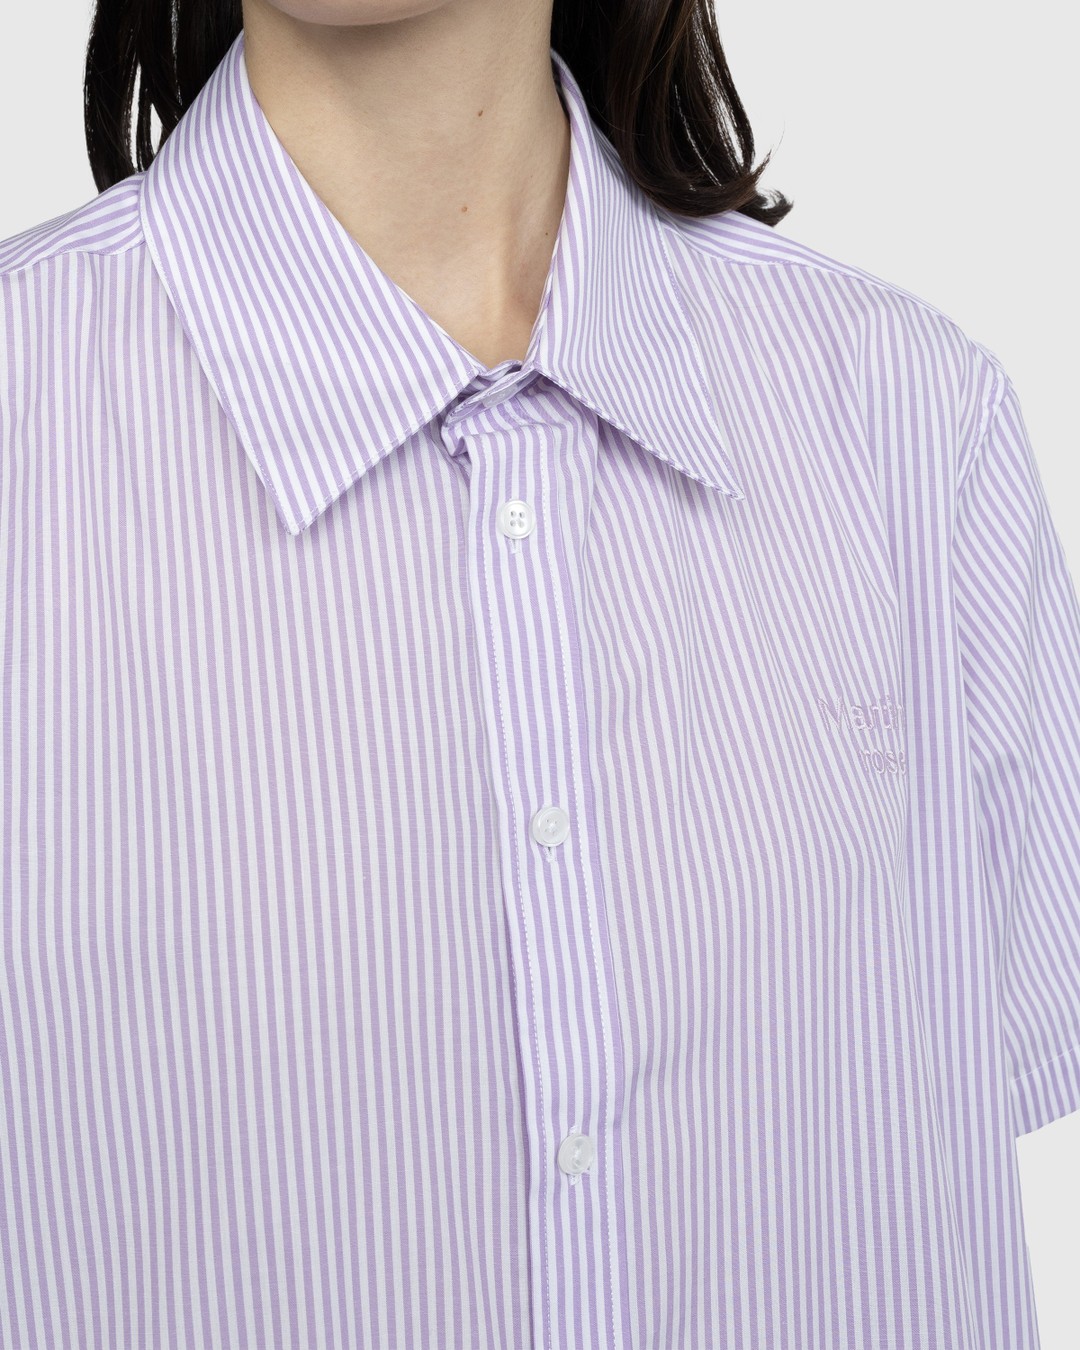 Martine Rose – Classic Short-Sleeve Button-Down Shirt Lilac and White Stripe - Shirts - Purple - Image 5